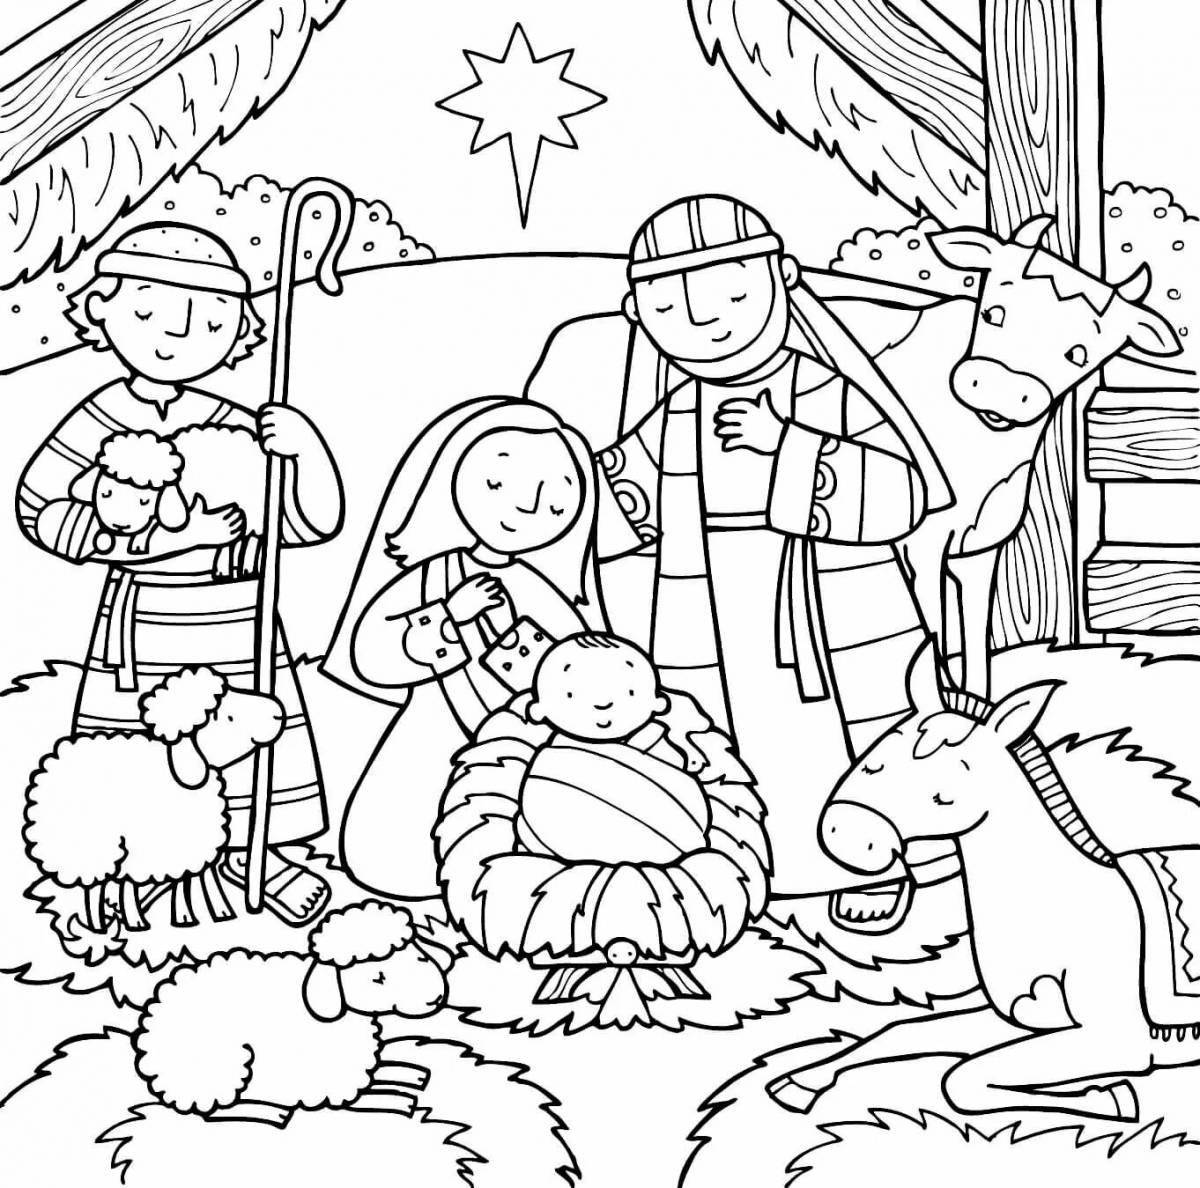 Colorful Christmas coloring book for 3-4 year olds